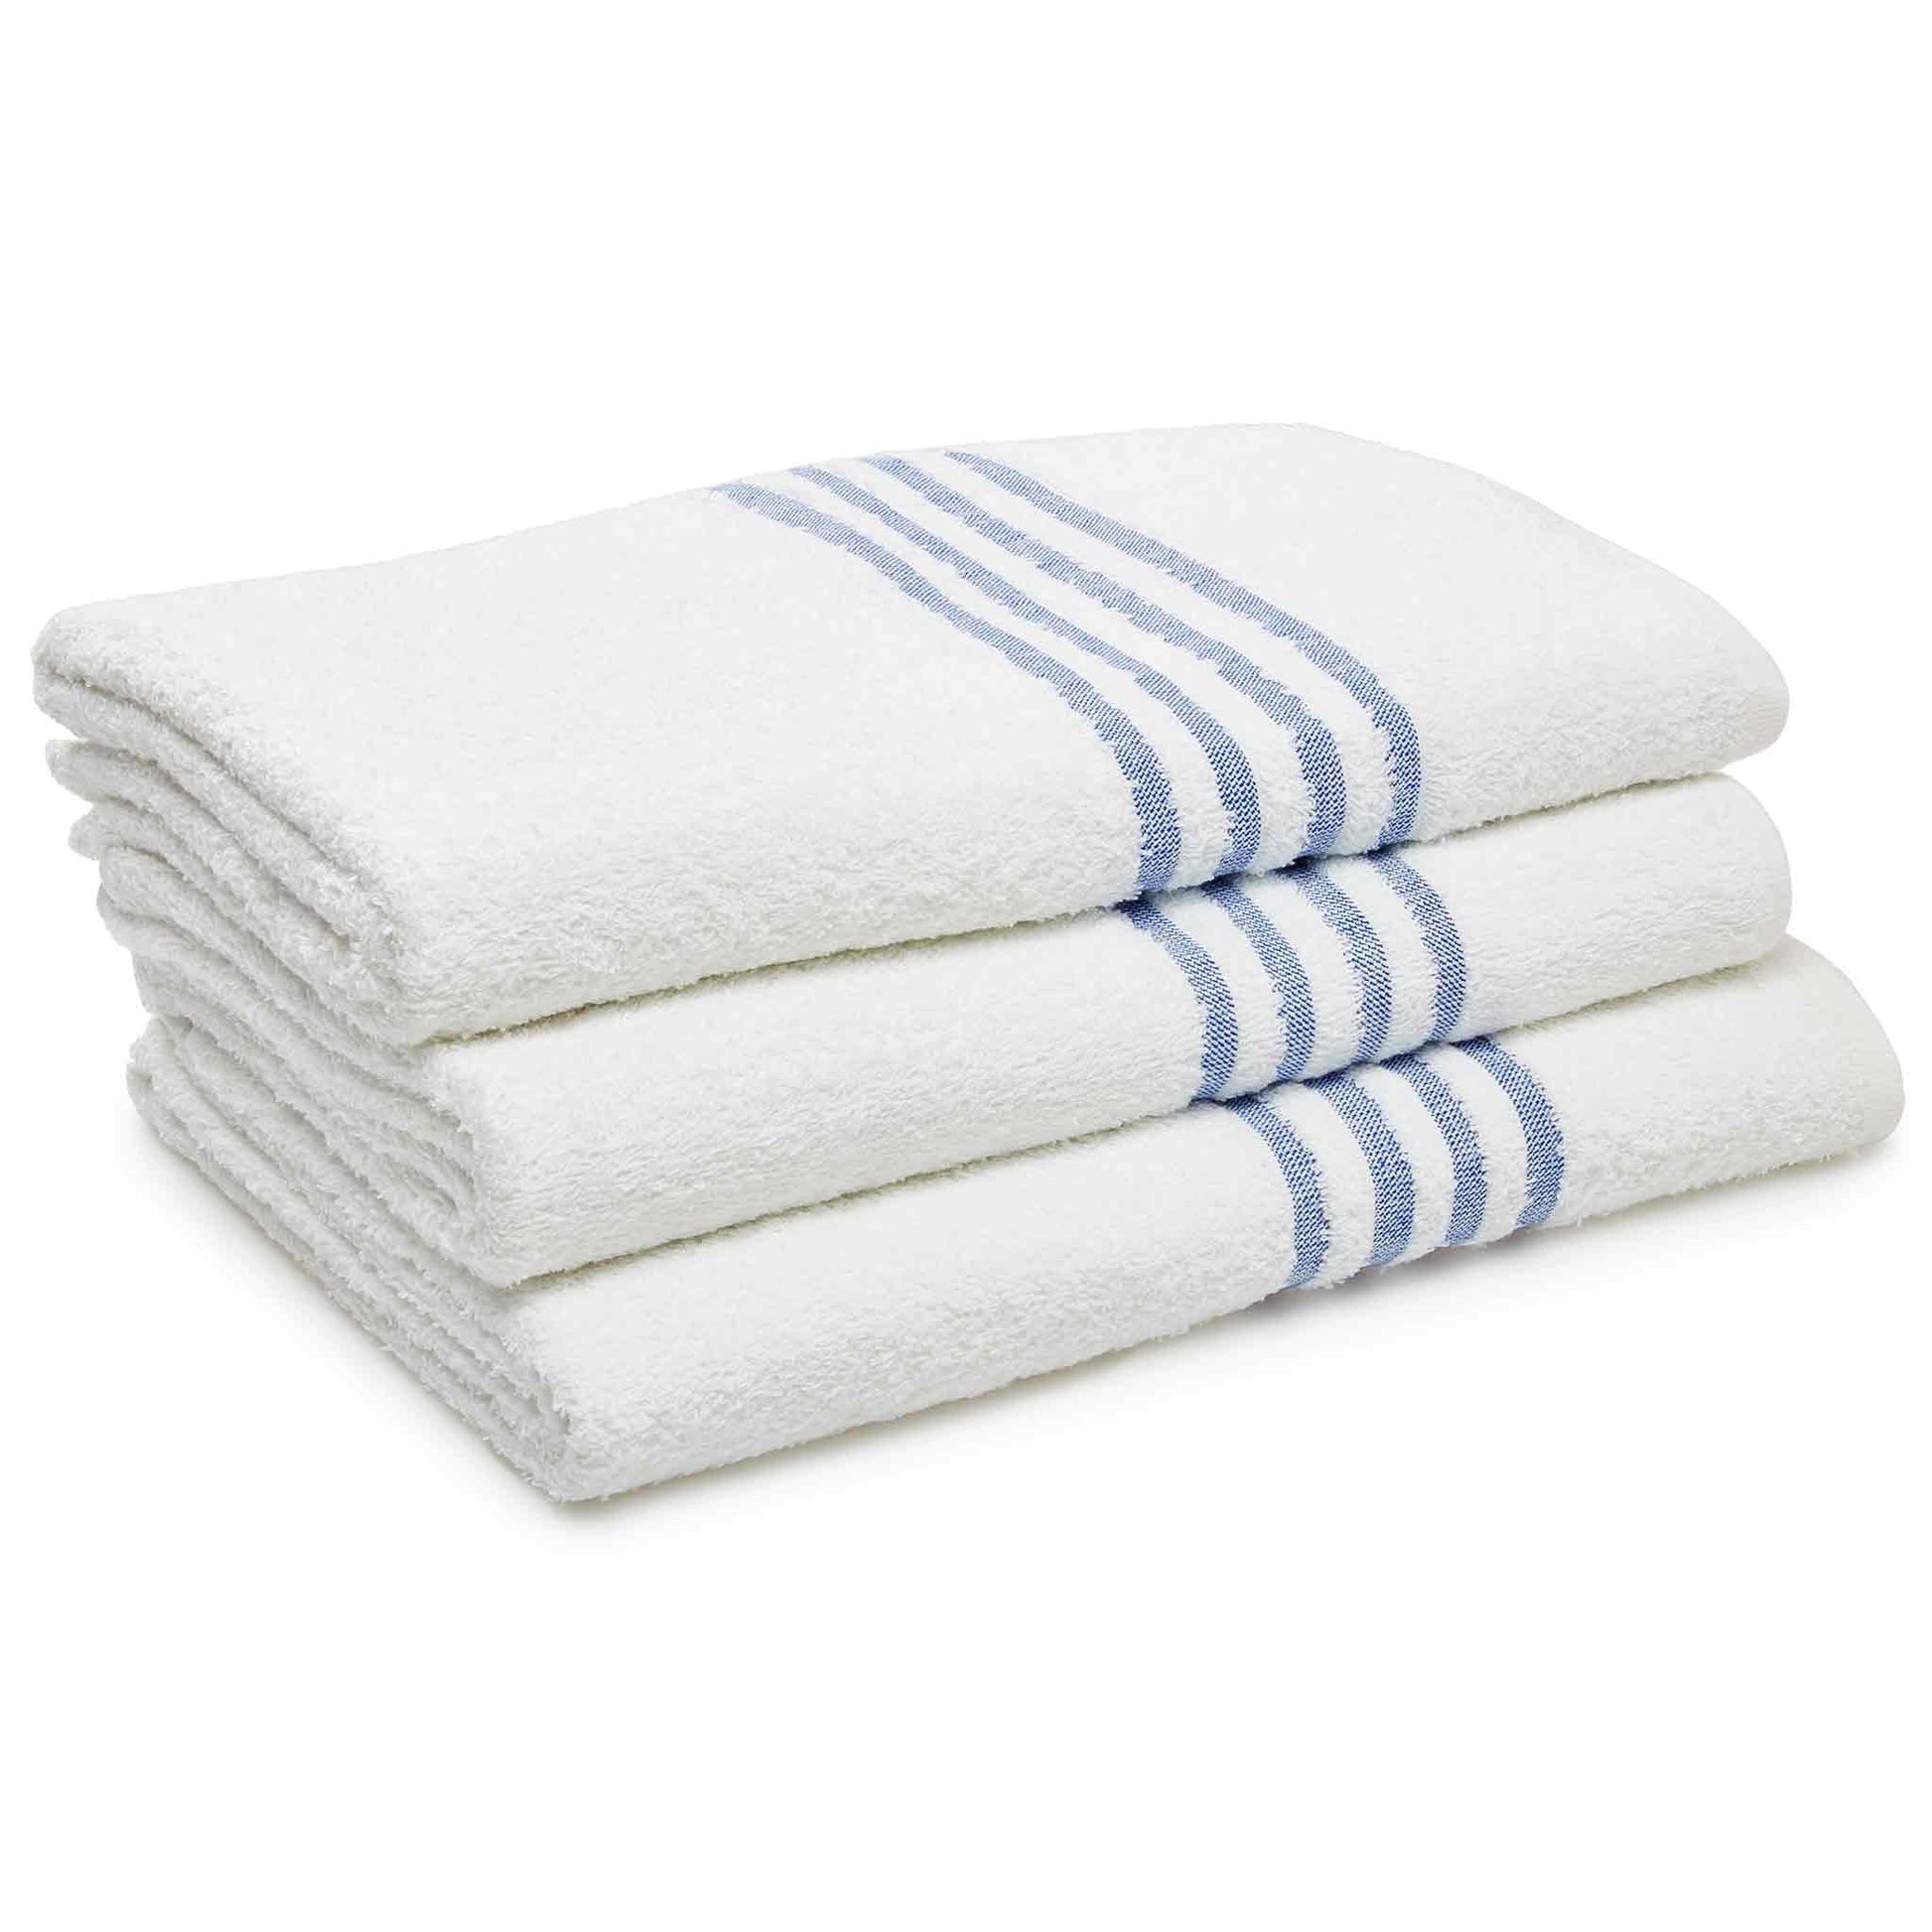 Stack of white leisure and spa towels with blue stripes